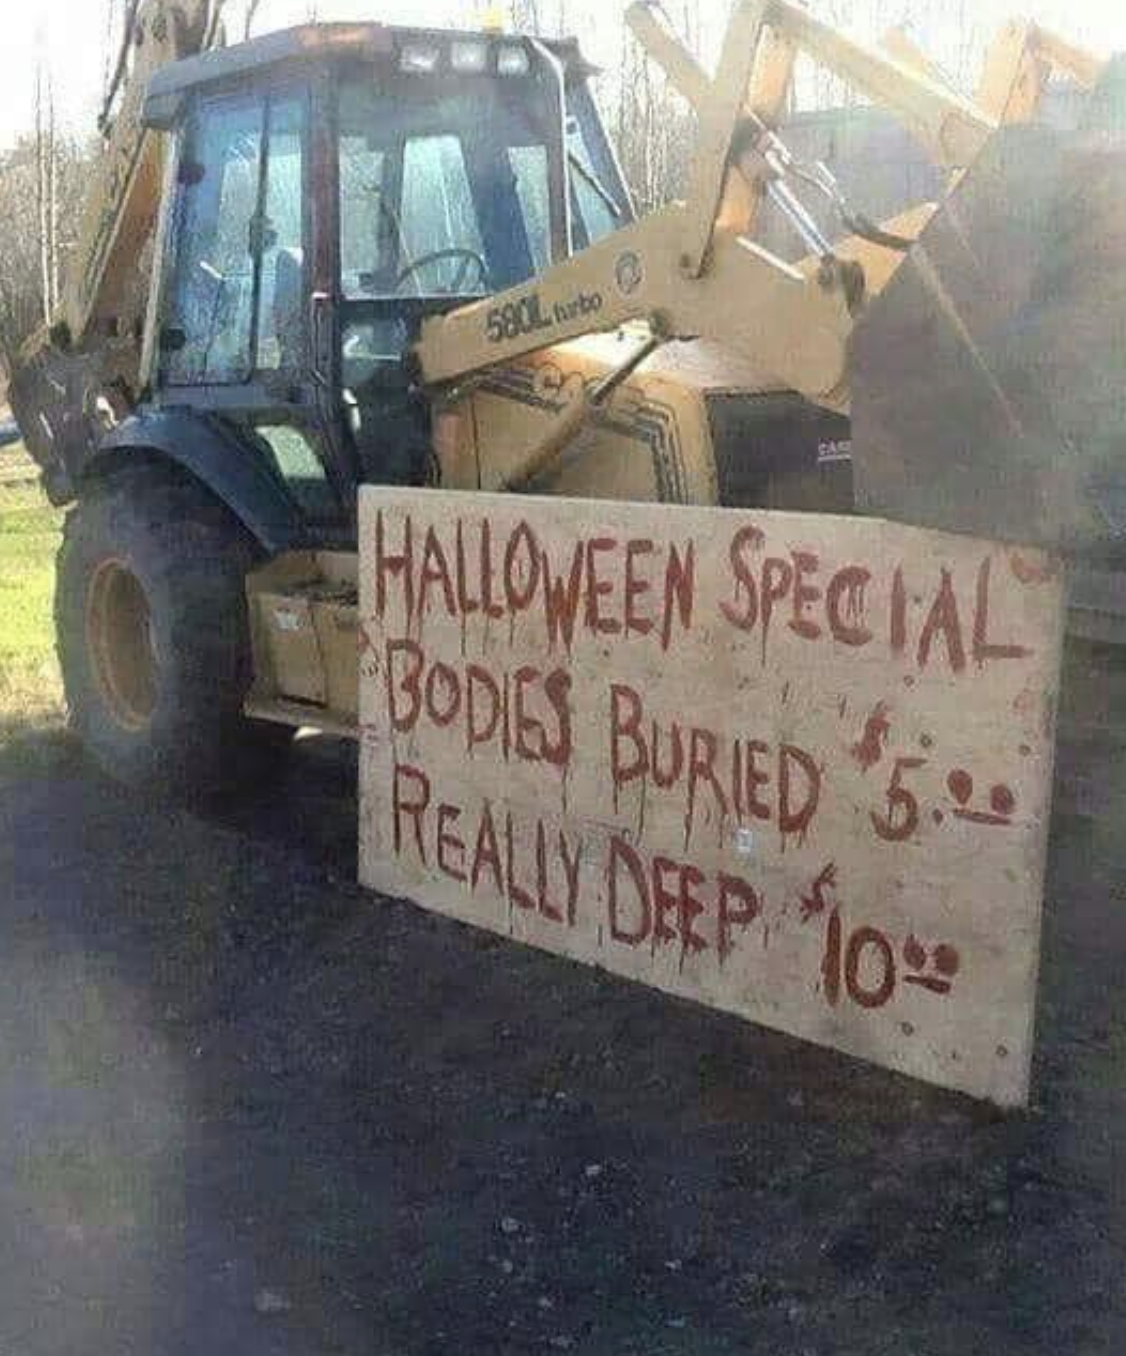 A wooden sign next to a large construction vehicle says &quot;Halloween special: bodies buried $5, really deep $10&quot;